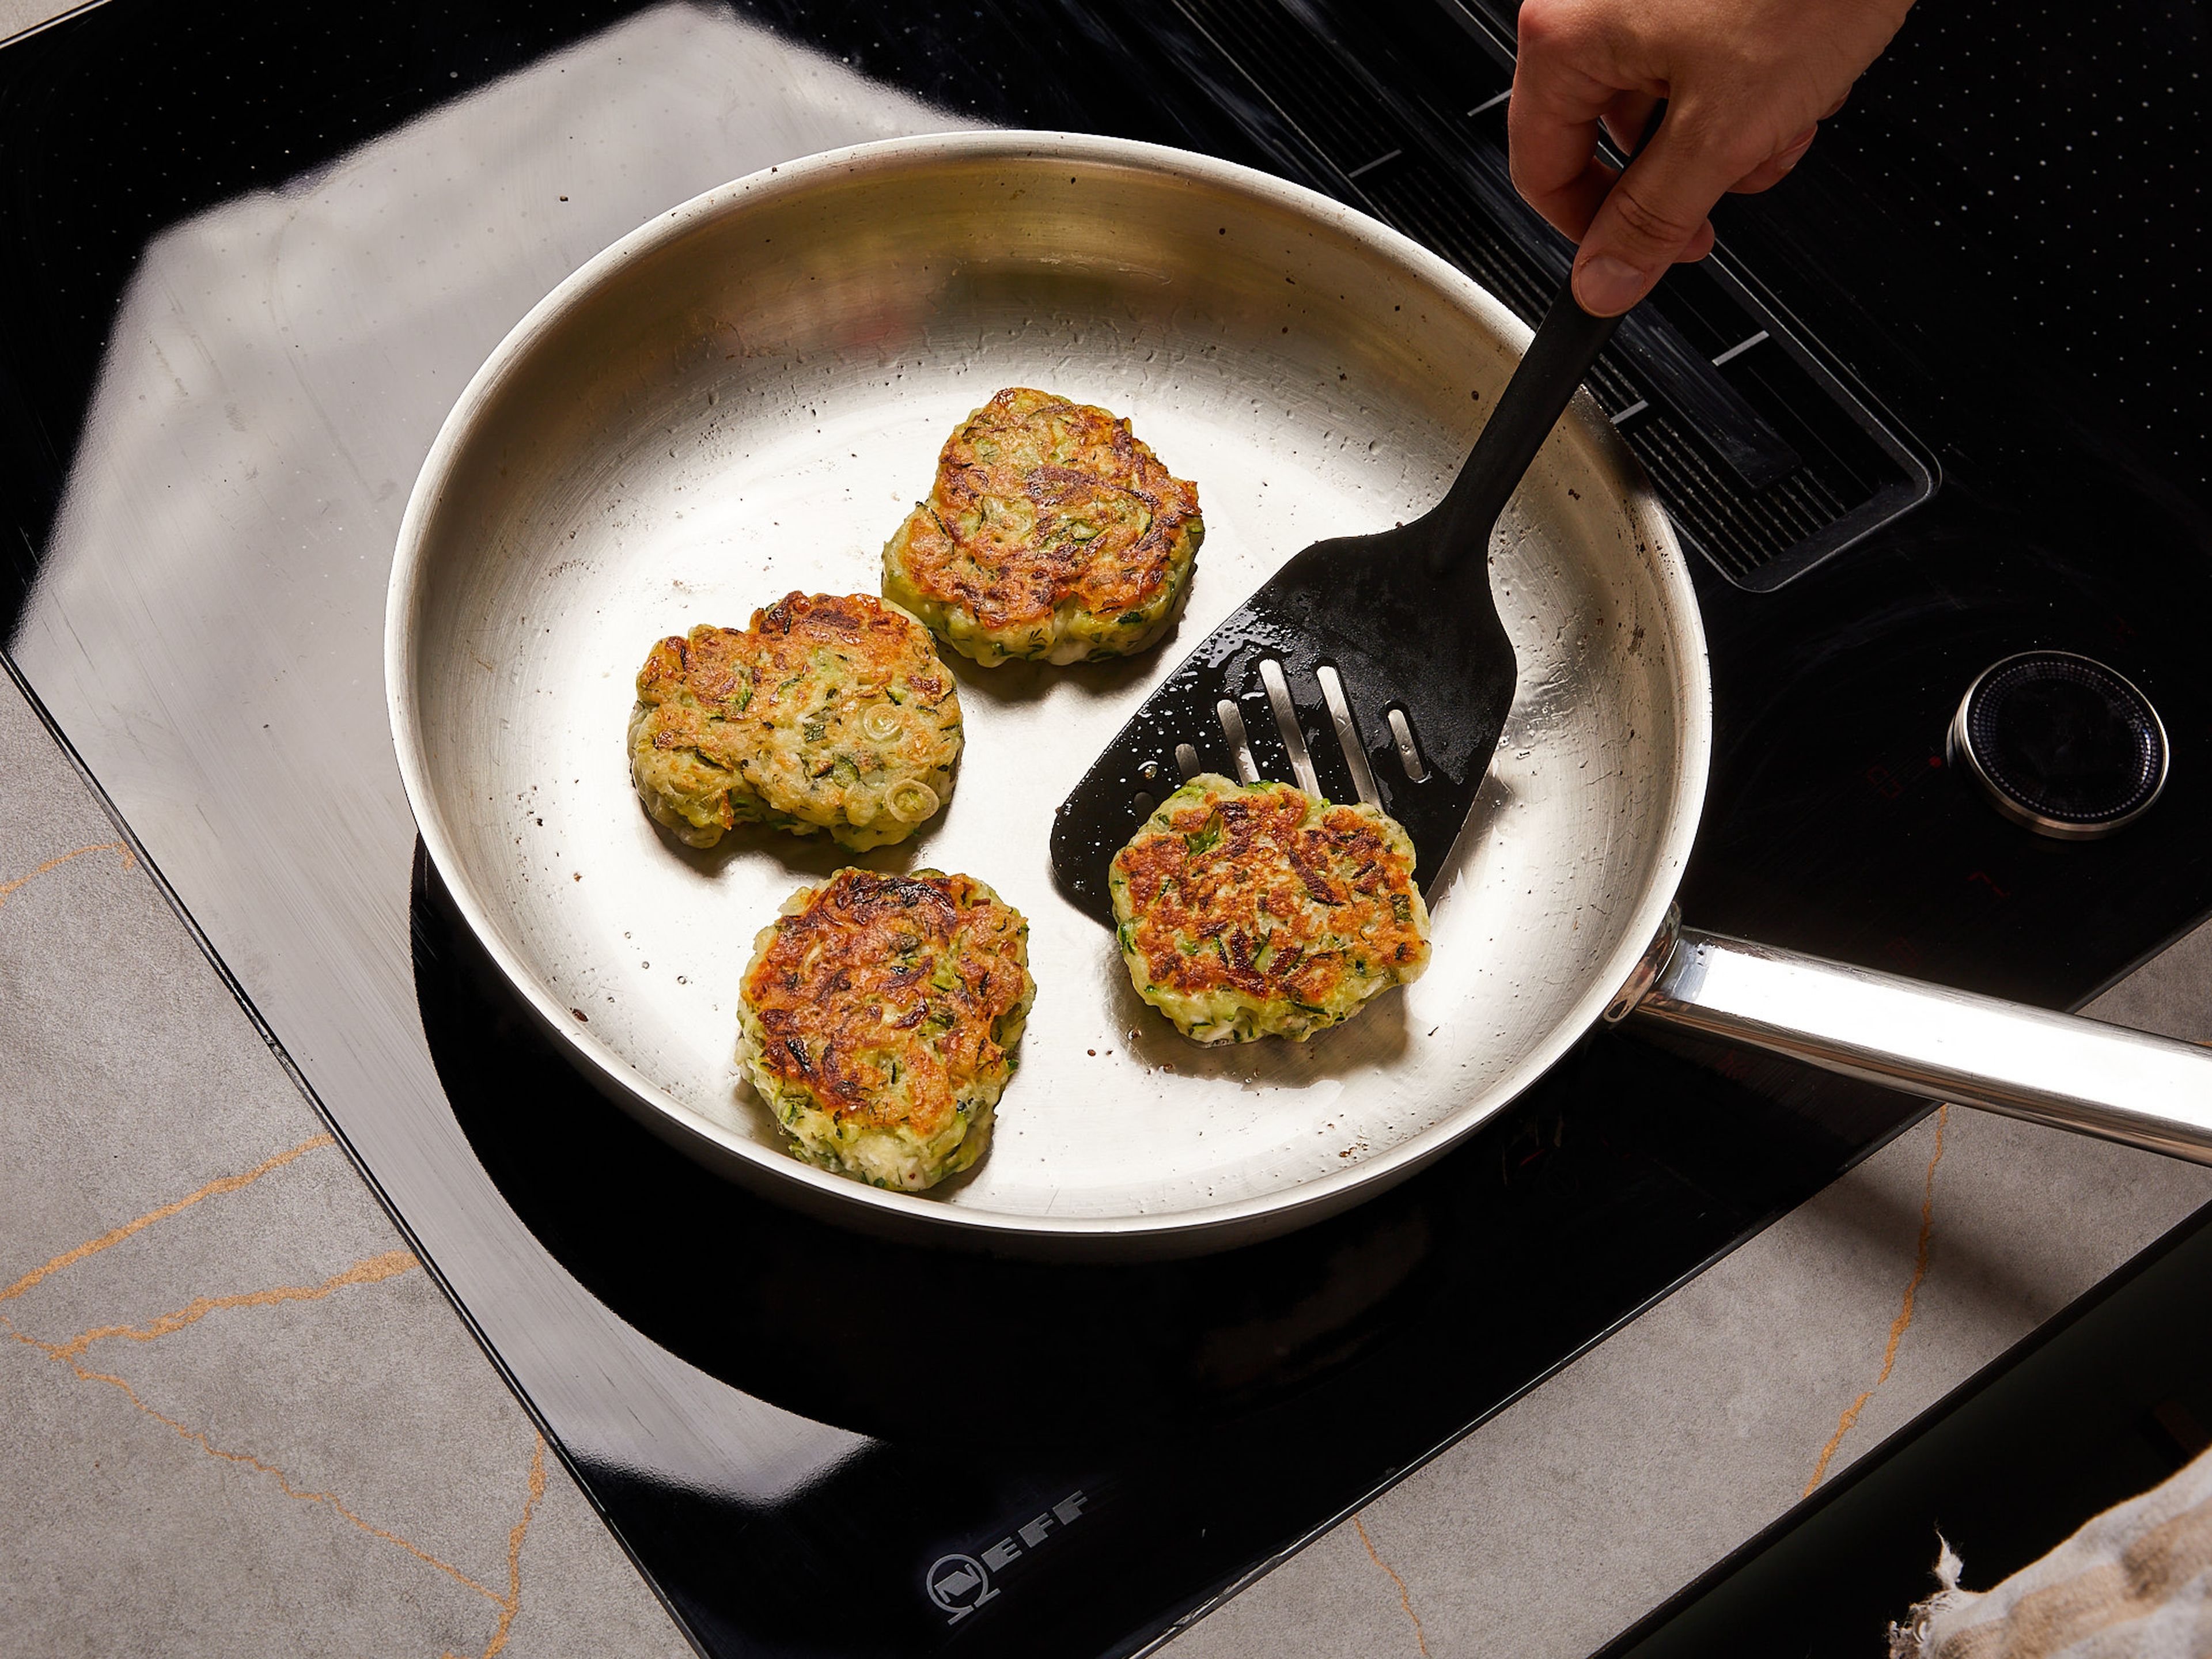 Heat oil in a skillet over medium-high heat and fry 2 tbsp of the zucchini mixture at a time, forming a fritter shape. Turn each over after approx. 3–4 min or when it starts to turn golden brown. Transfer to a plate lined with paper towels to drain.